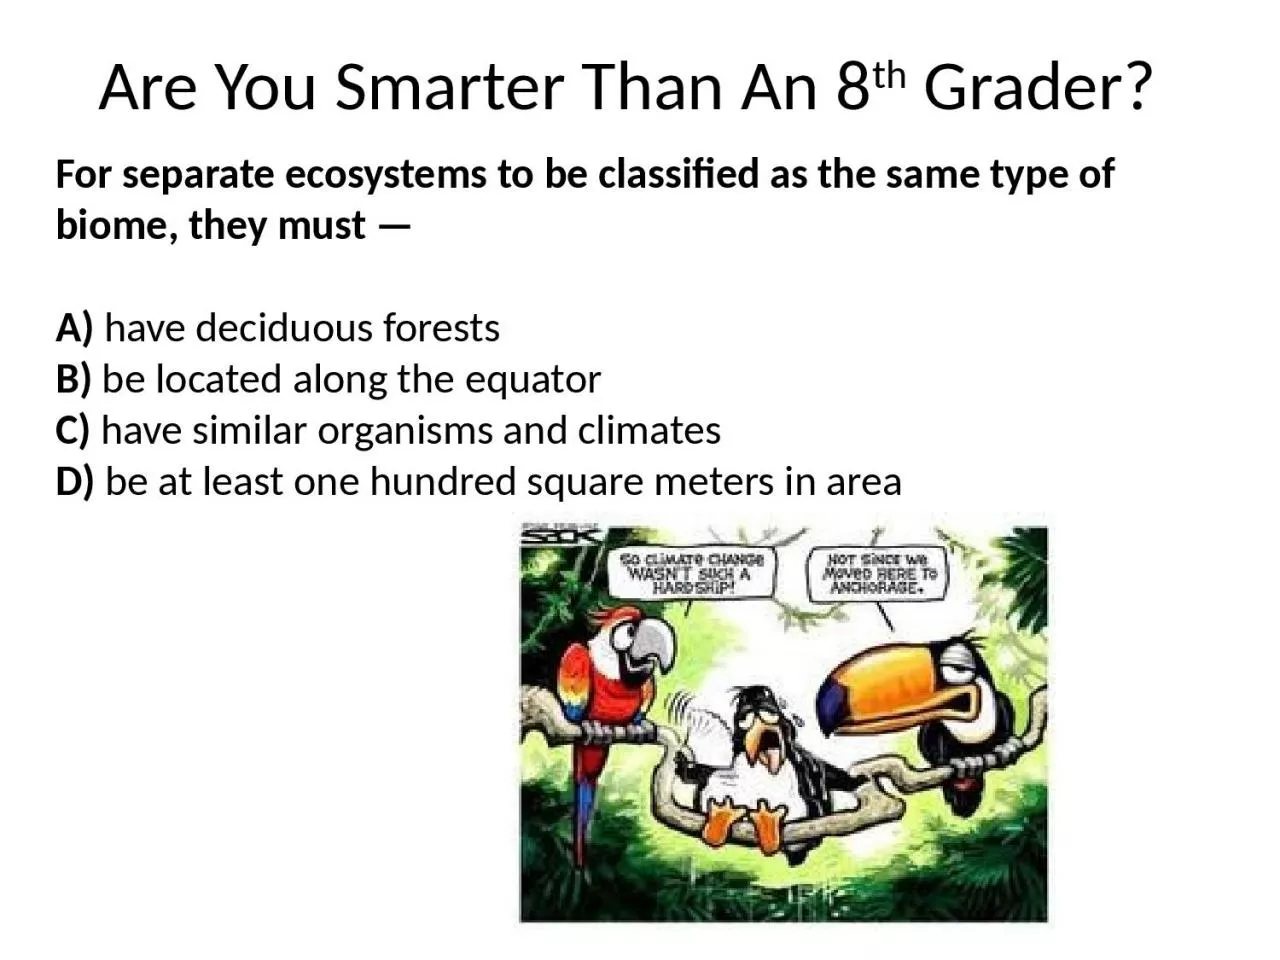 For separate ecosystems to be classified as the same type of